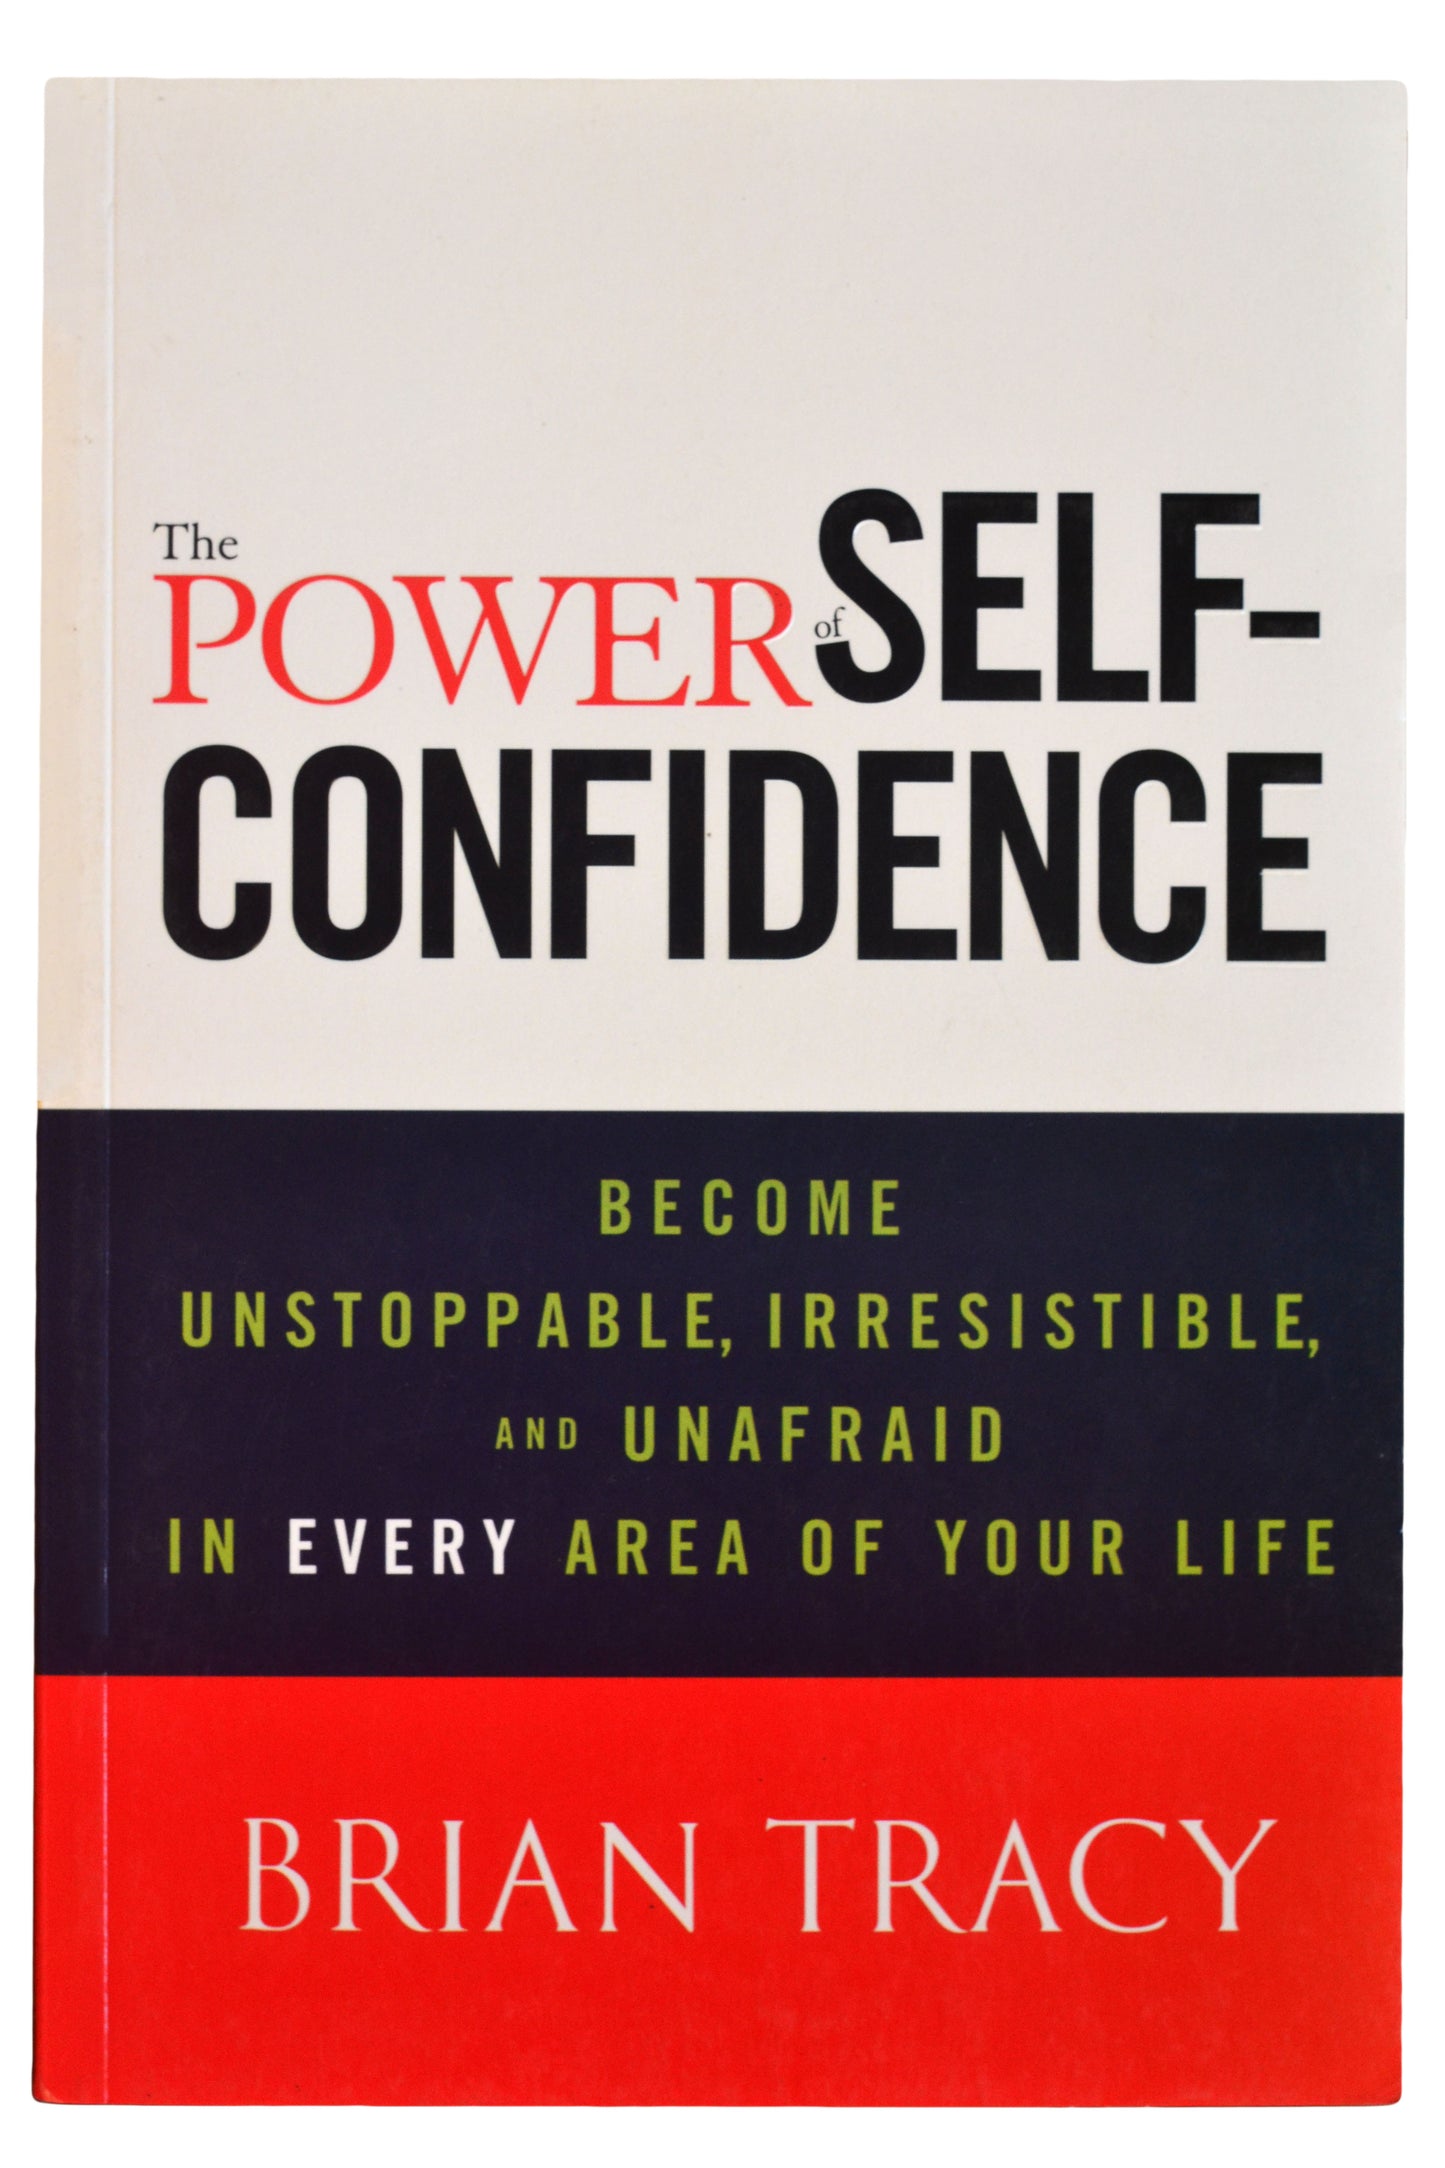 THE POWER OF SELF-CONFIDENCE